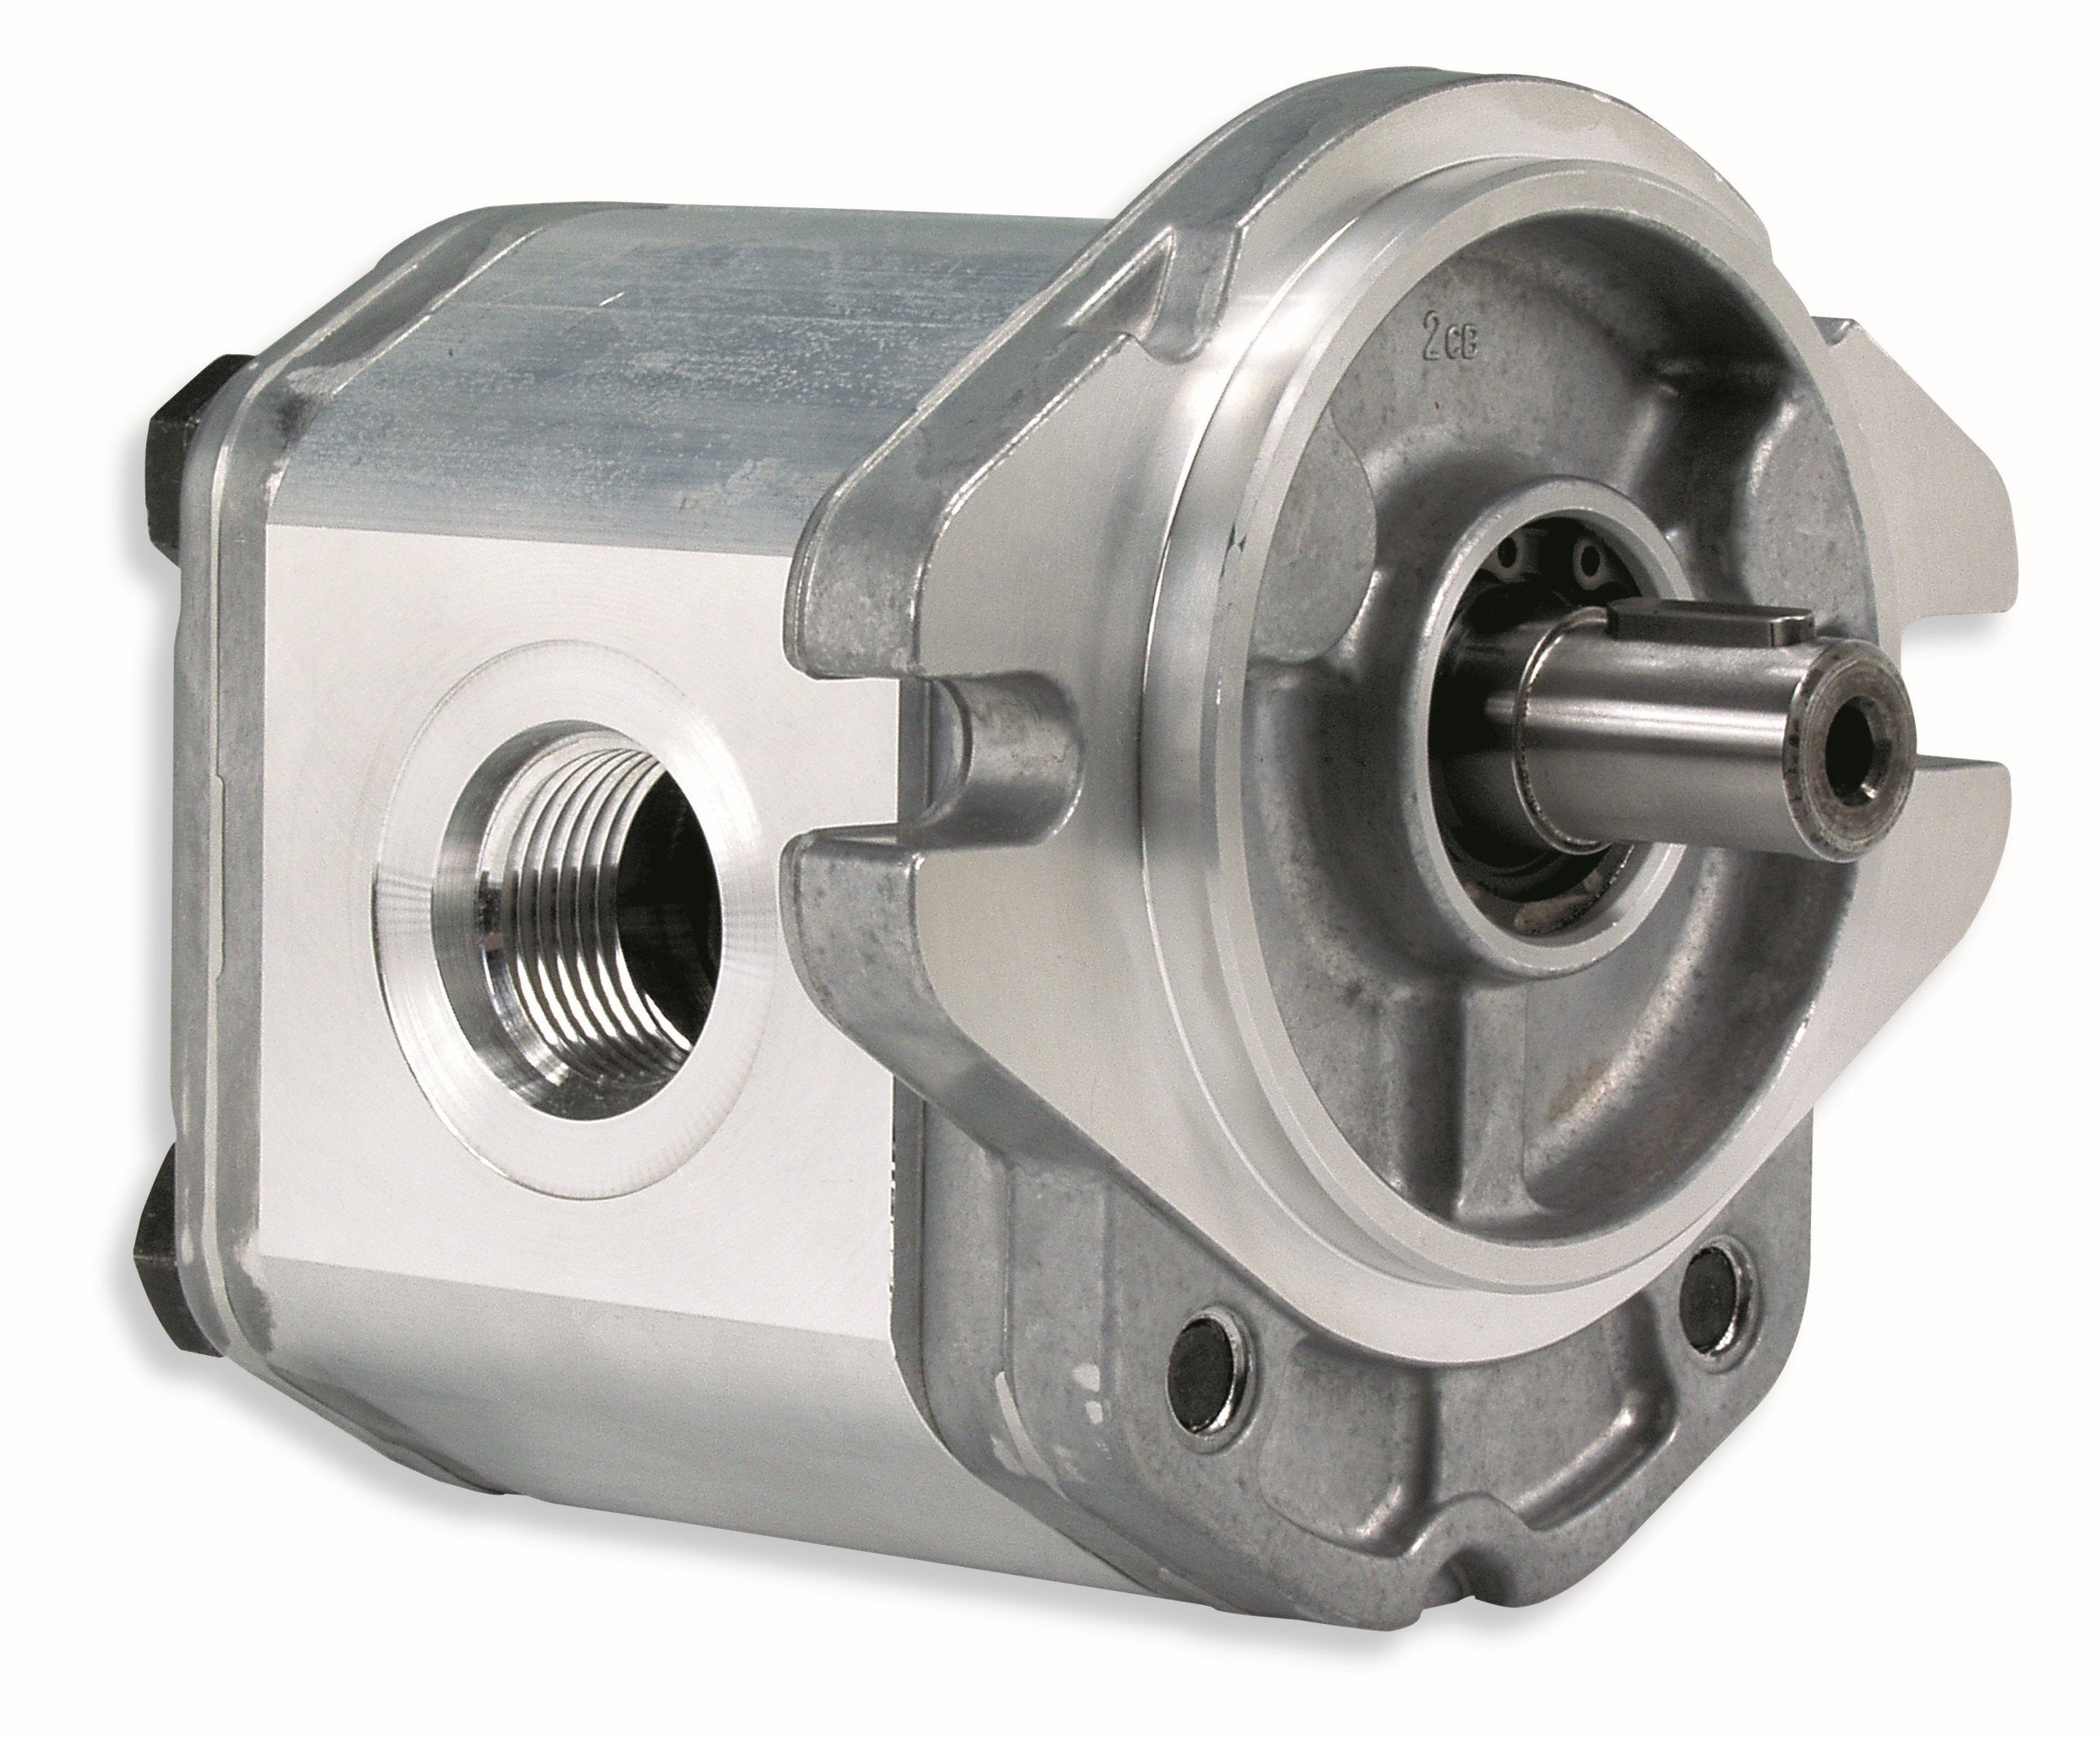 GHM3A-R-40-E4 : Marzocchi Gear Motor, Bidirectional, 26cc, 4060psi rated, 3300RPM, 1" Code 61 ports, 7/8" Bore x 1/4" Keyed Shaft